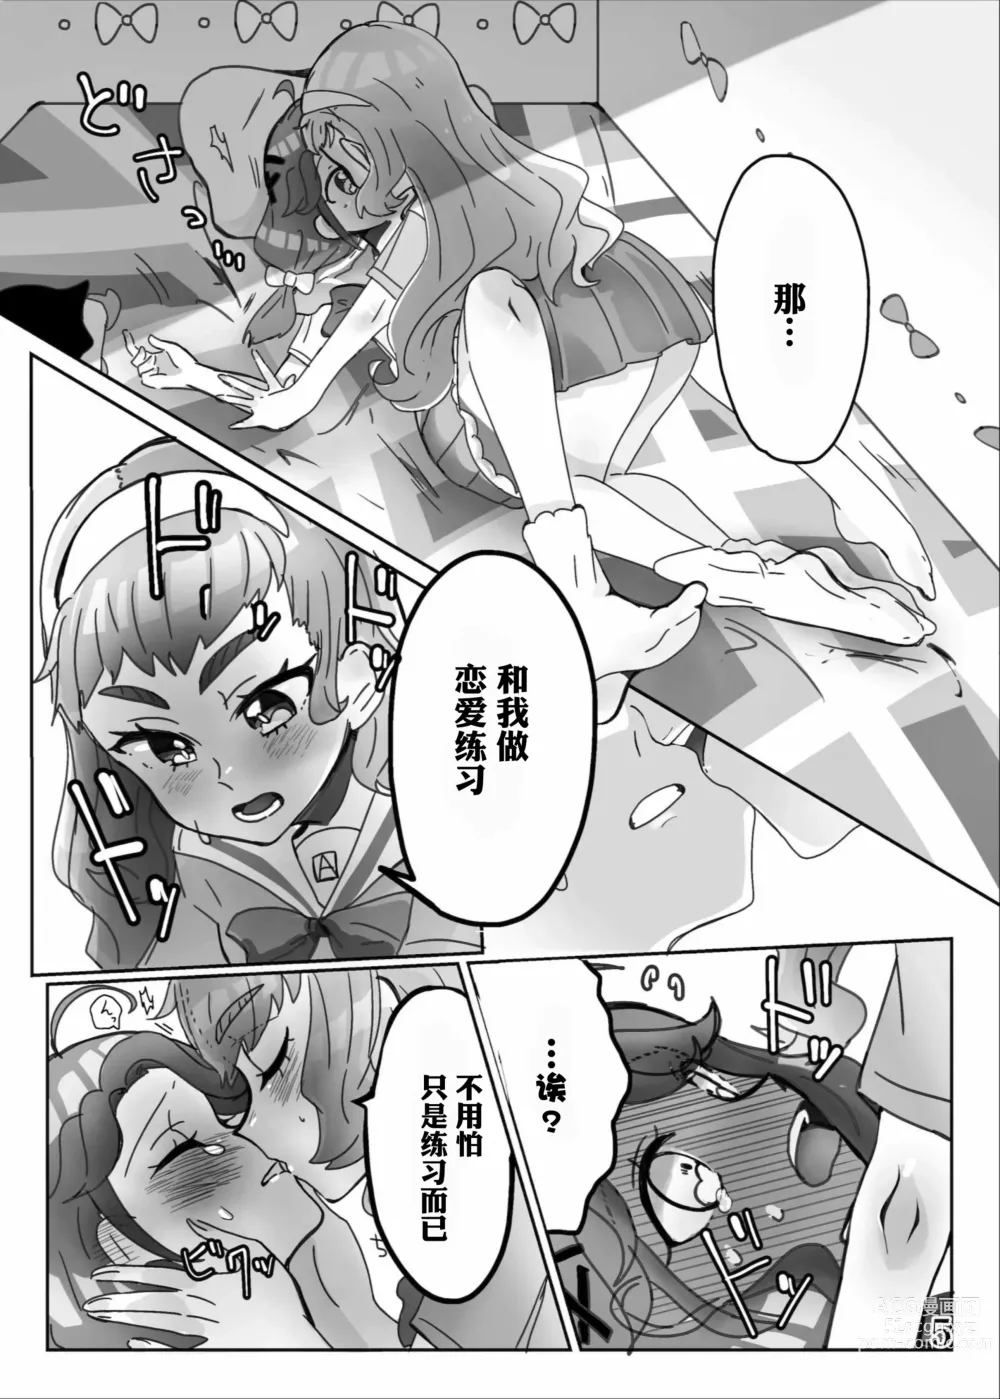 Page 7 of doujinshi 想做能干的孩子♪ DO MY BEST!